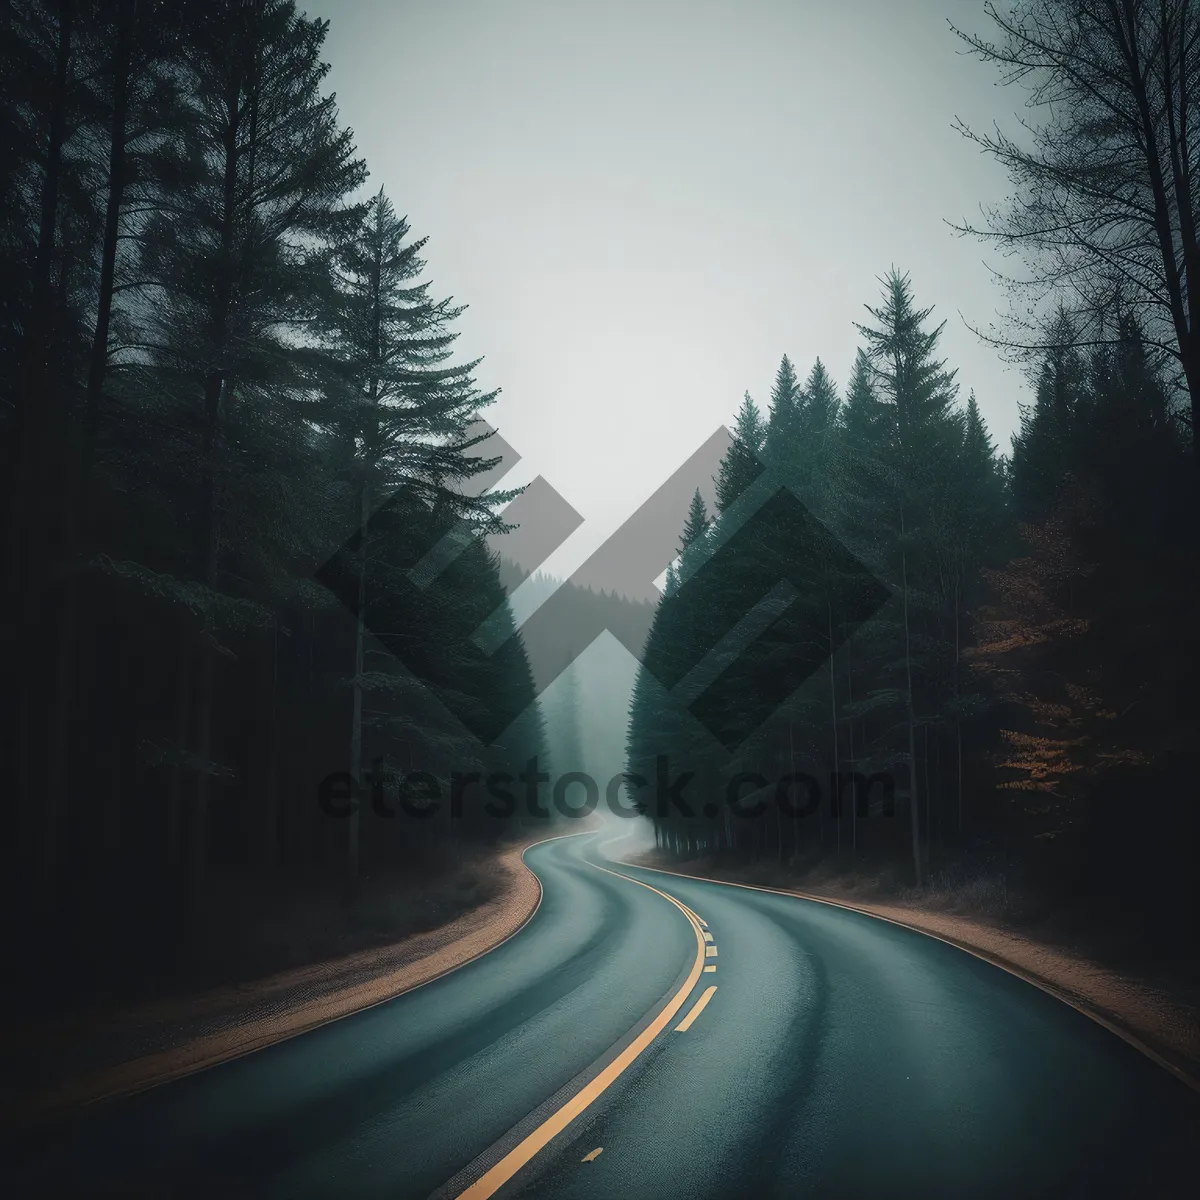 Picture of Speeding through mountain curves with scenic view